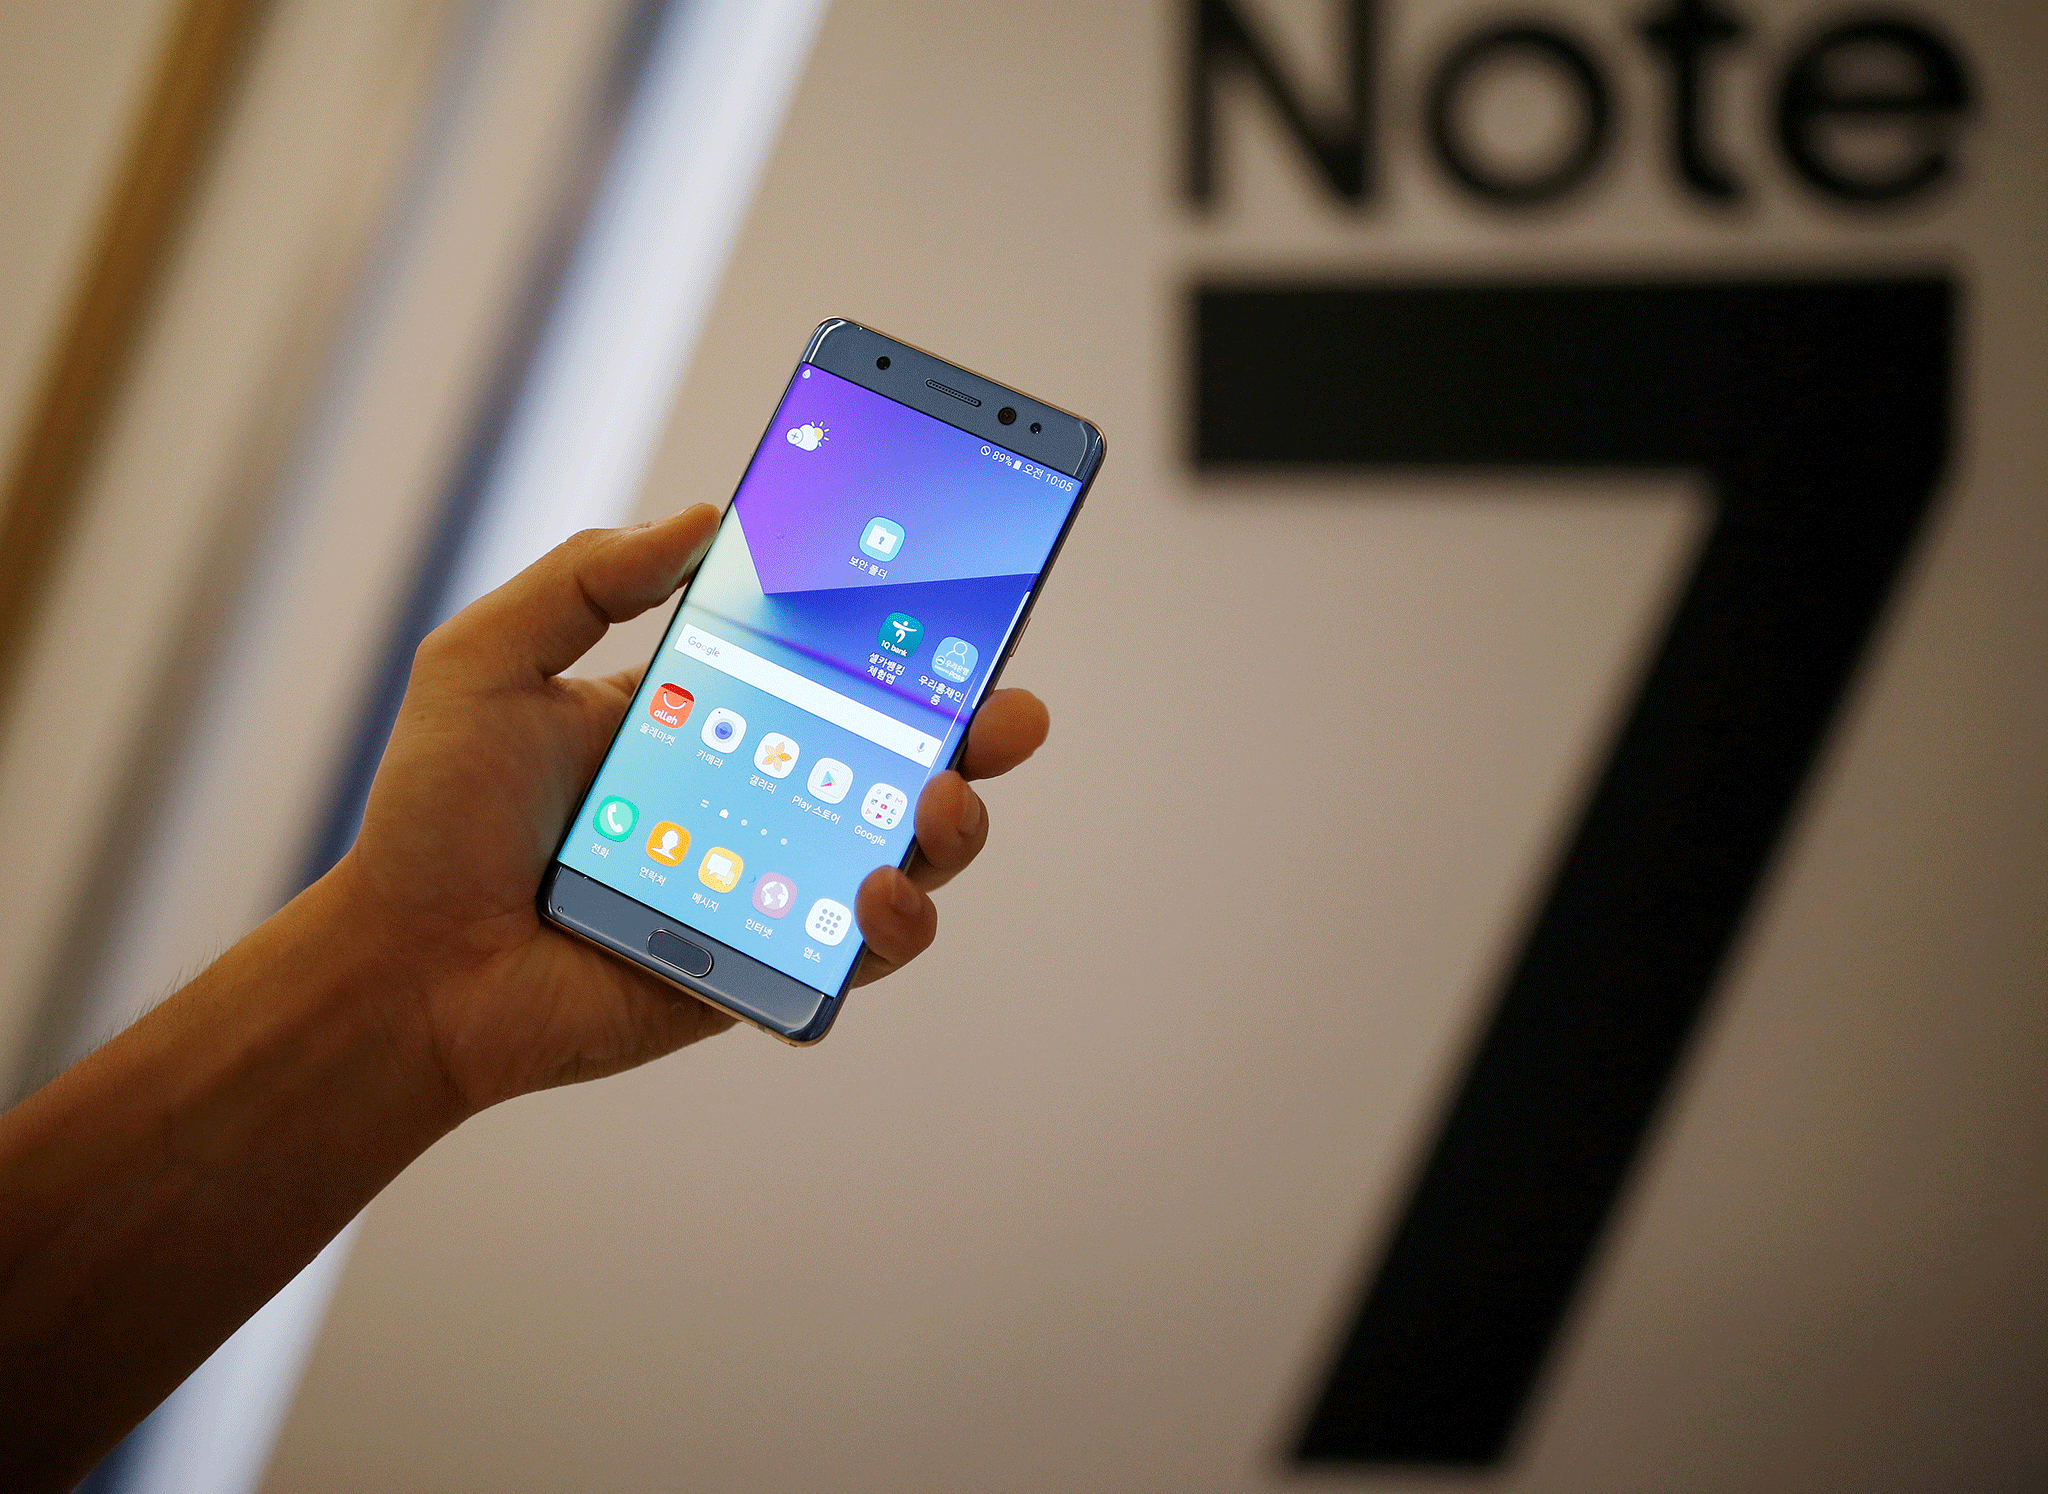 Samsung Galaxy Note 7 disaster wipes $19bn off company's value